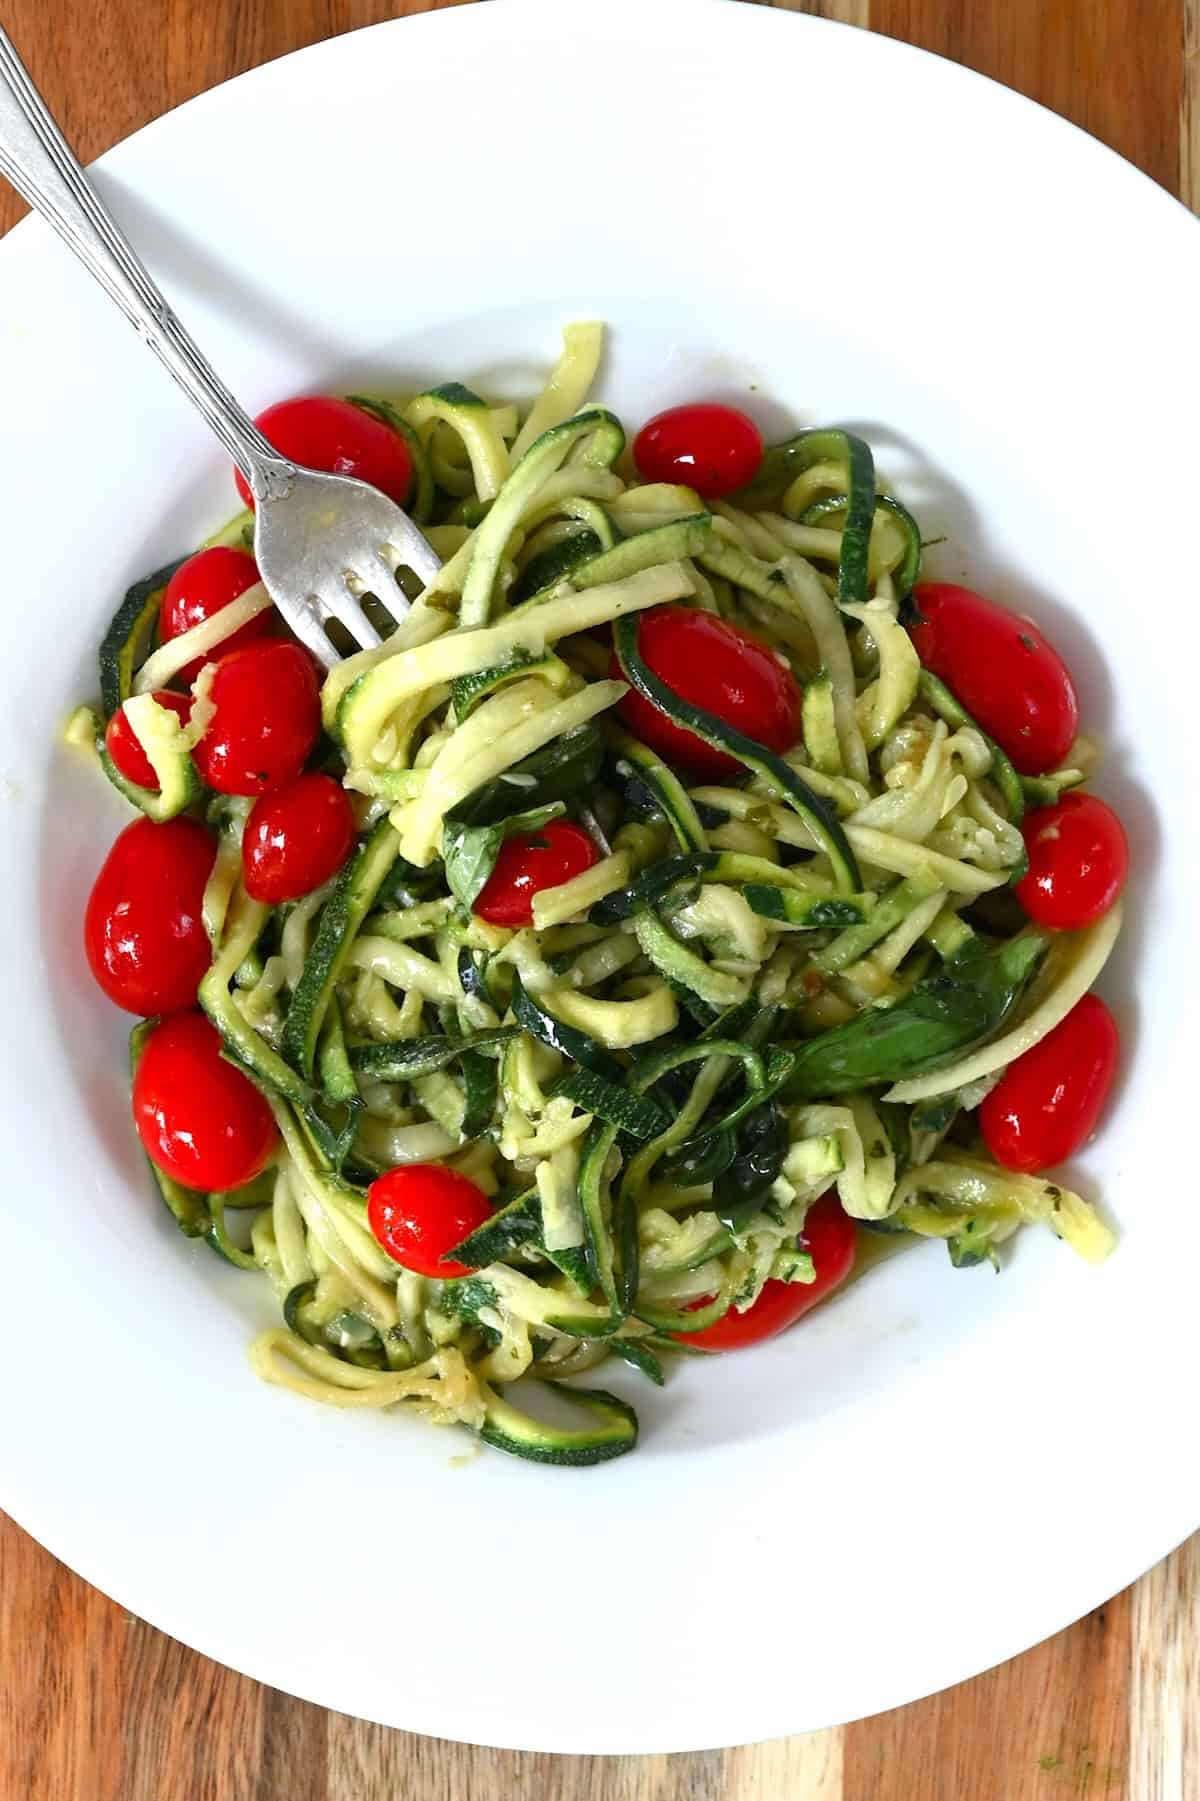 A serving of zucchini noodles with cherry tomatoes